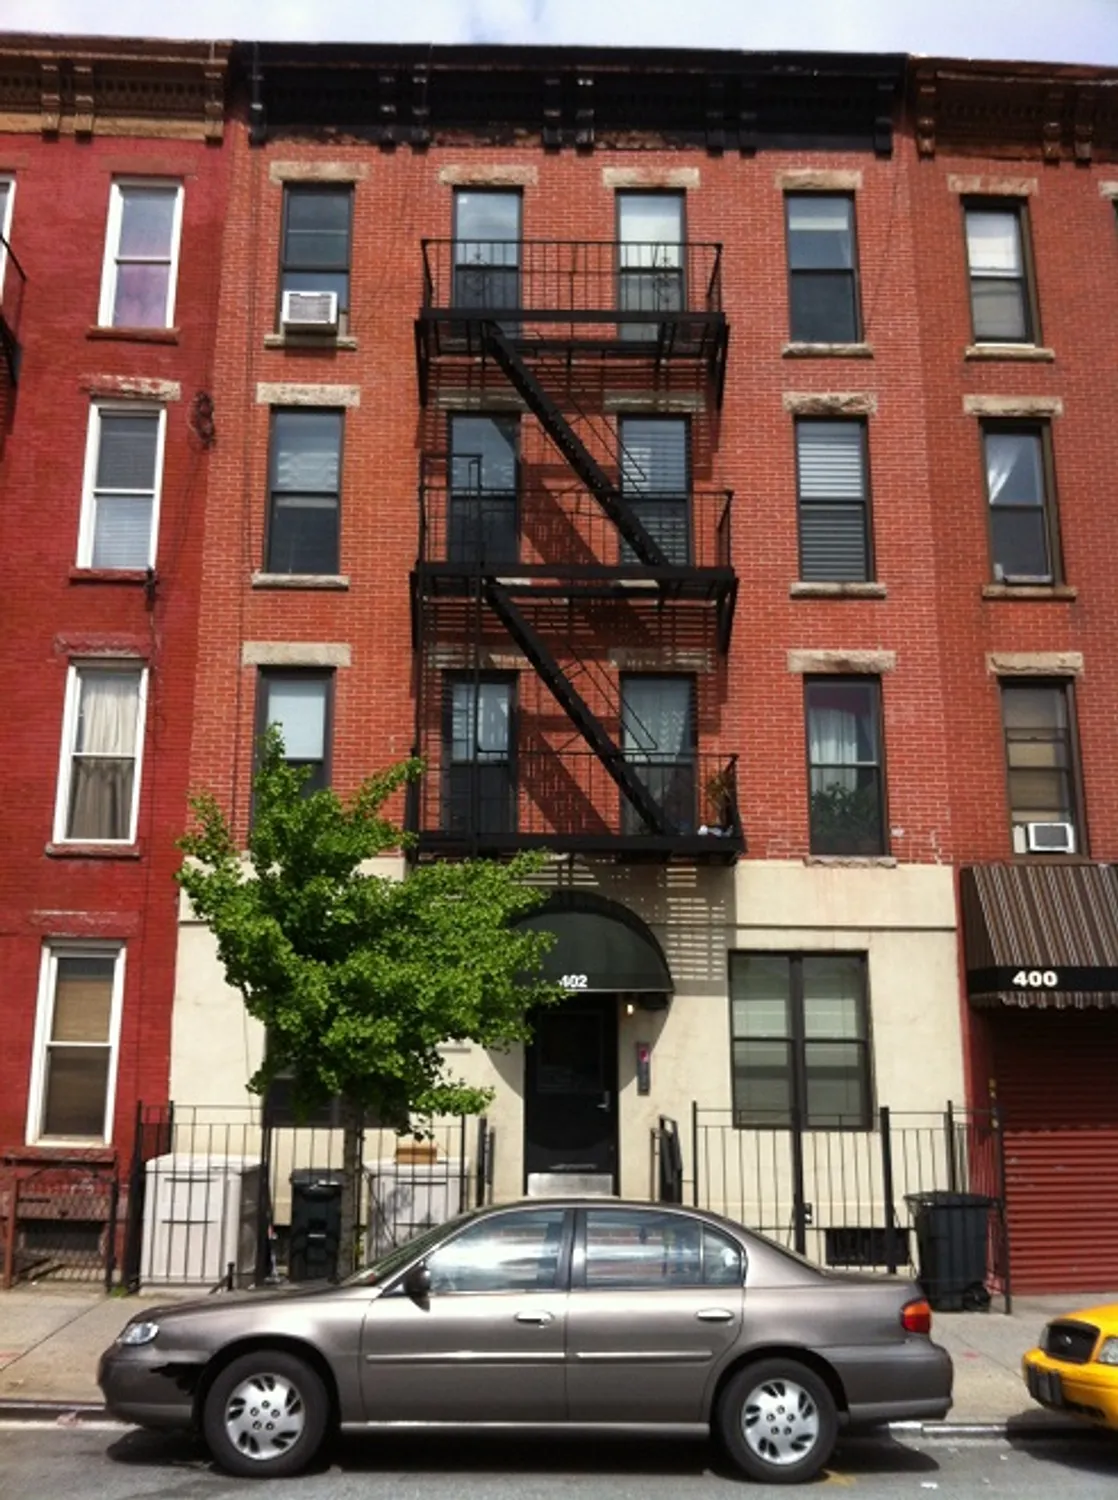 Well-maintained 4-story co-op building